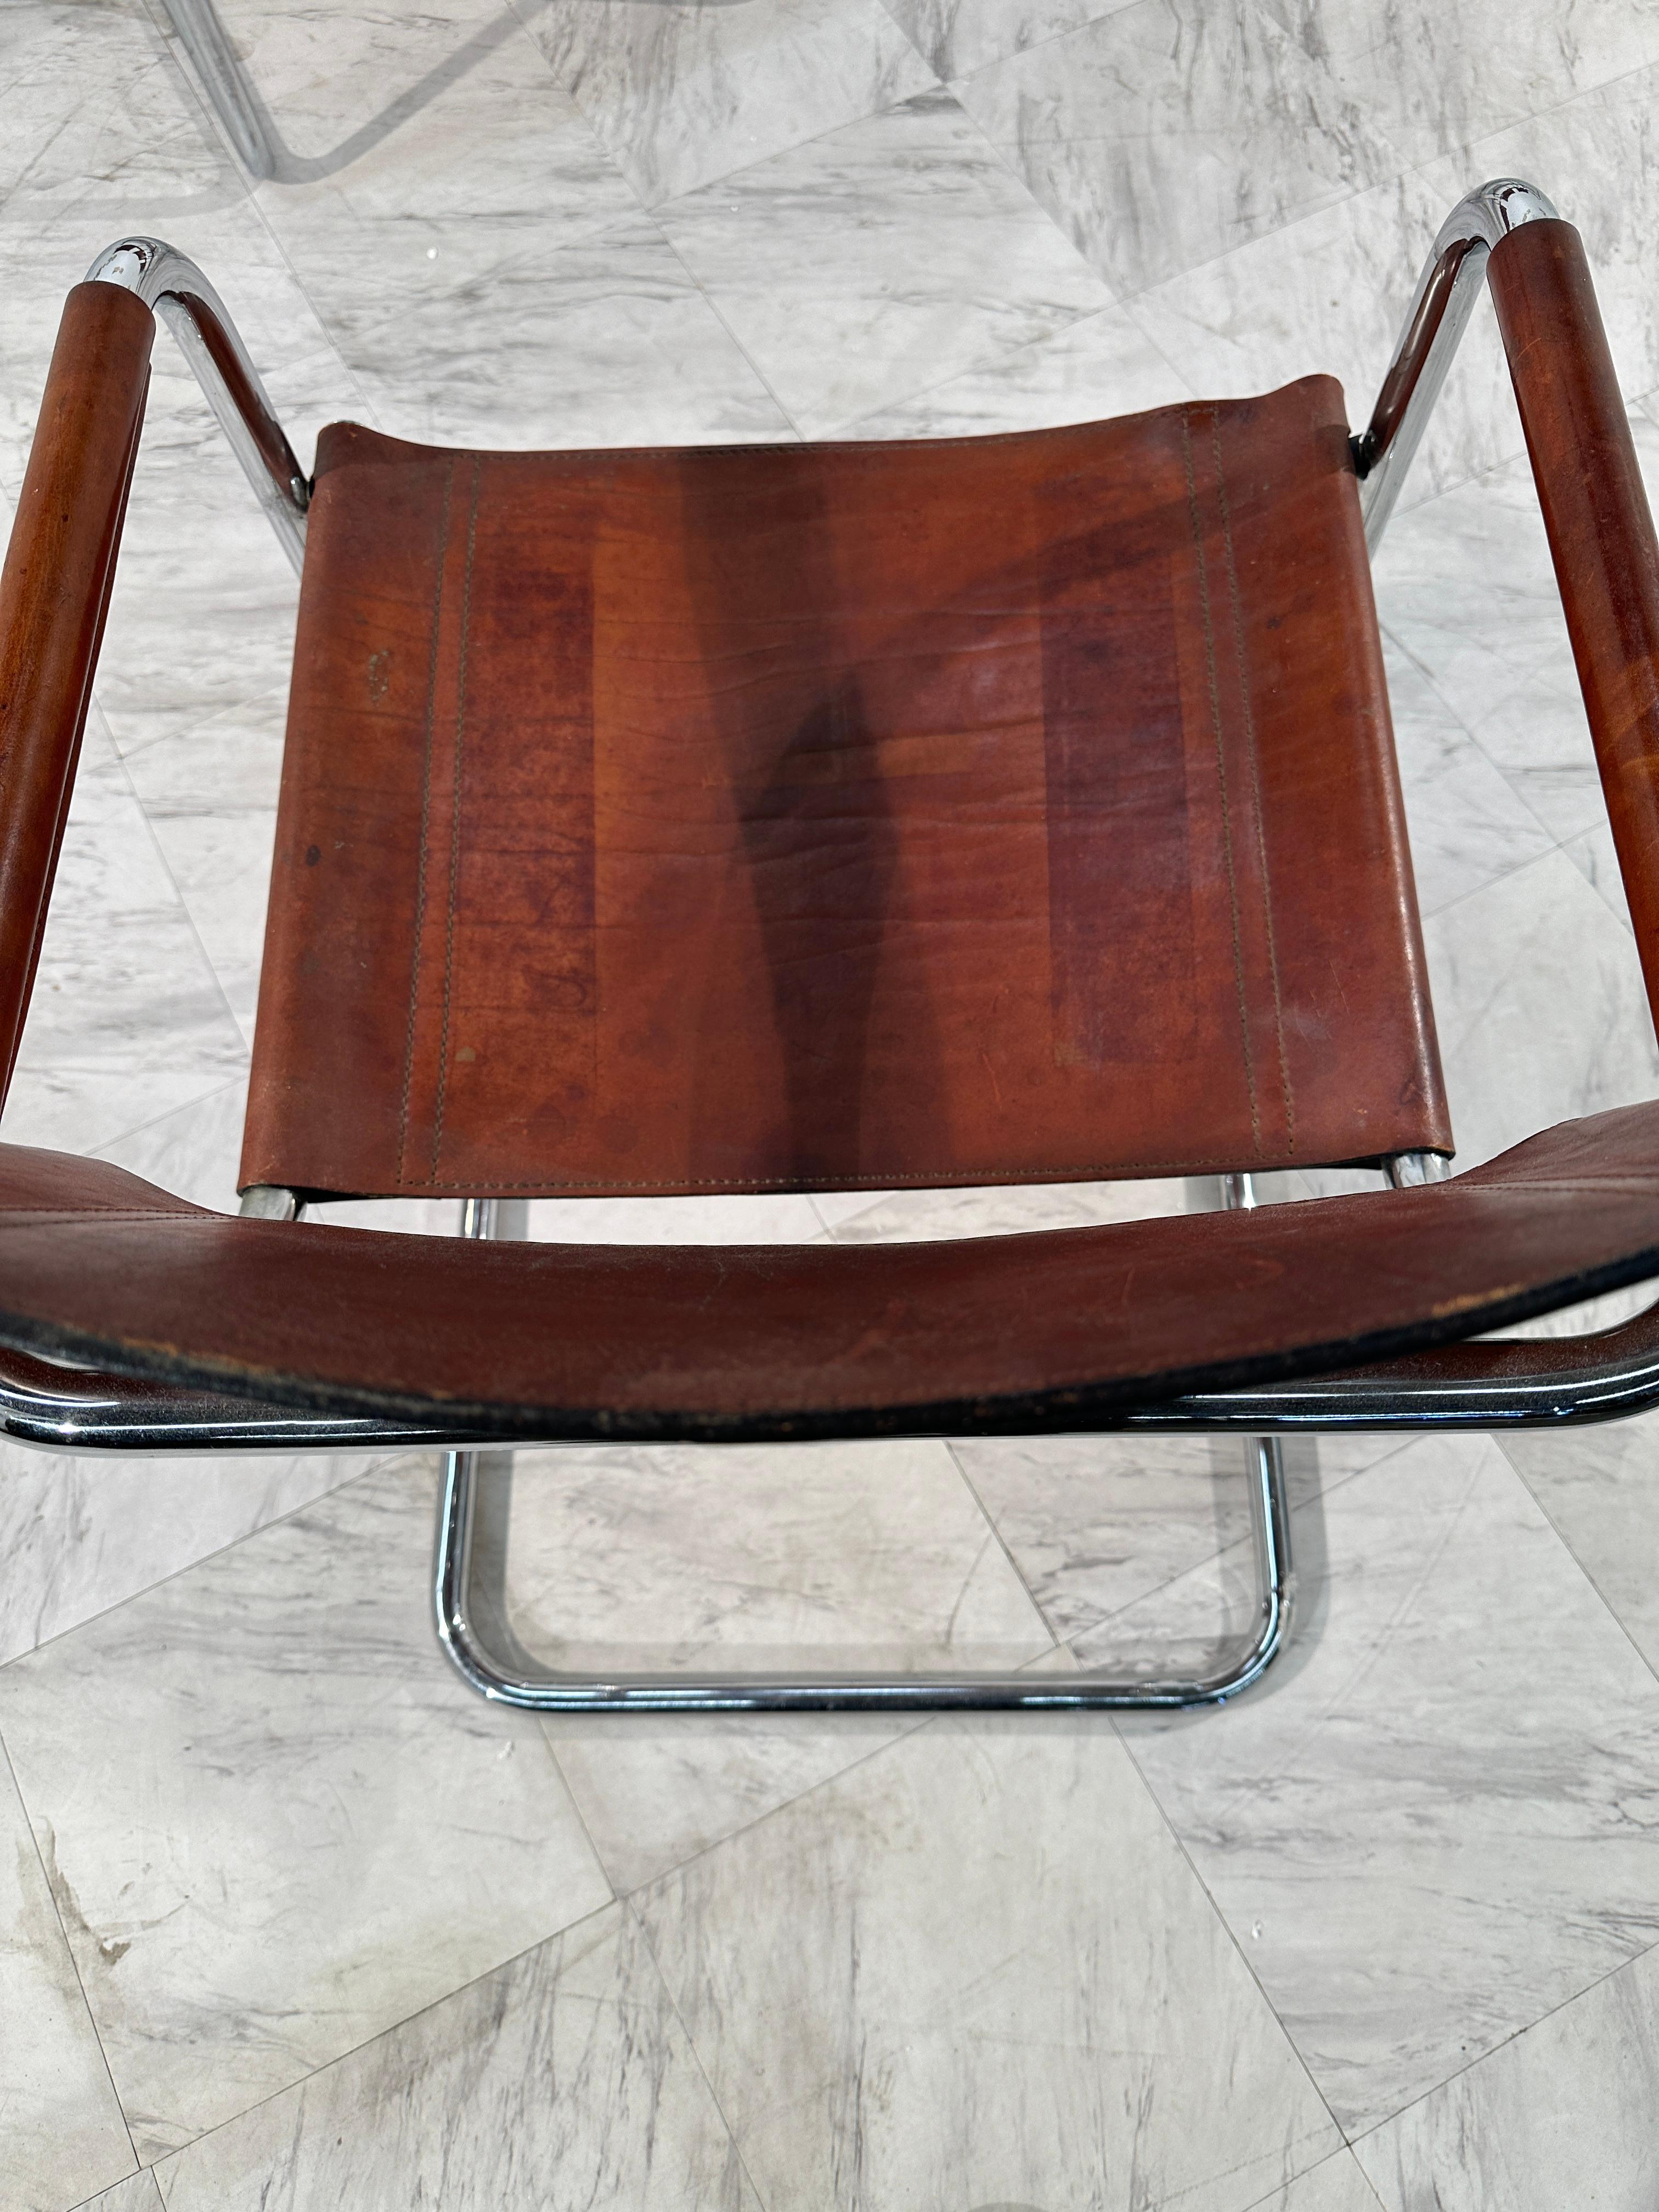 Italian Vintage S34 Armchairs by Mart Stam & Marcel Breuer for Thonet, 1950s For Sale